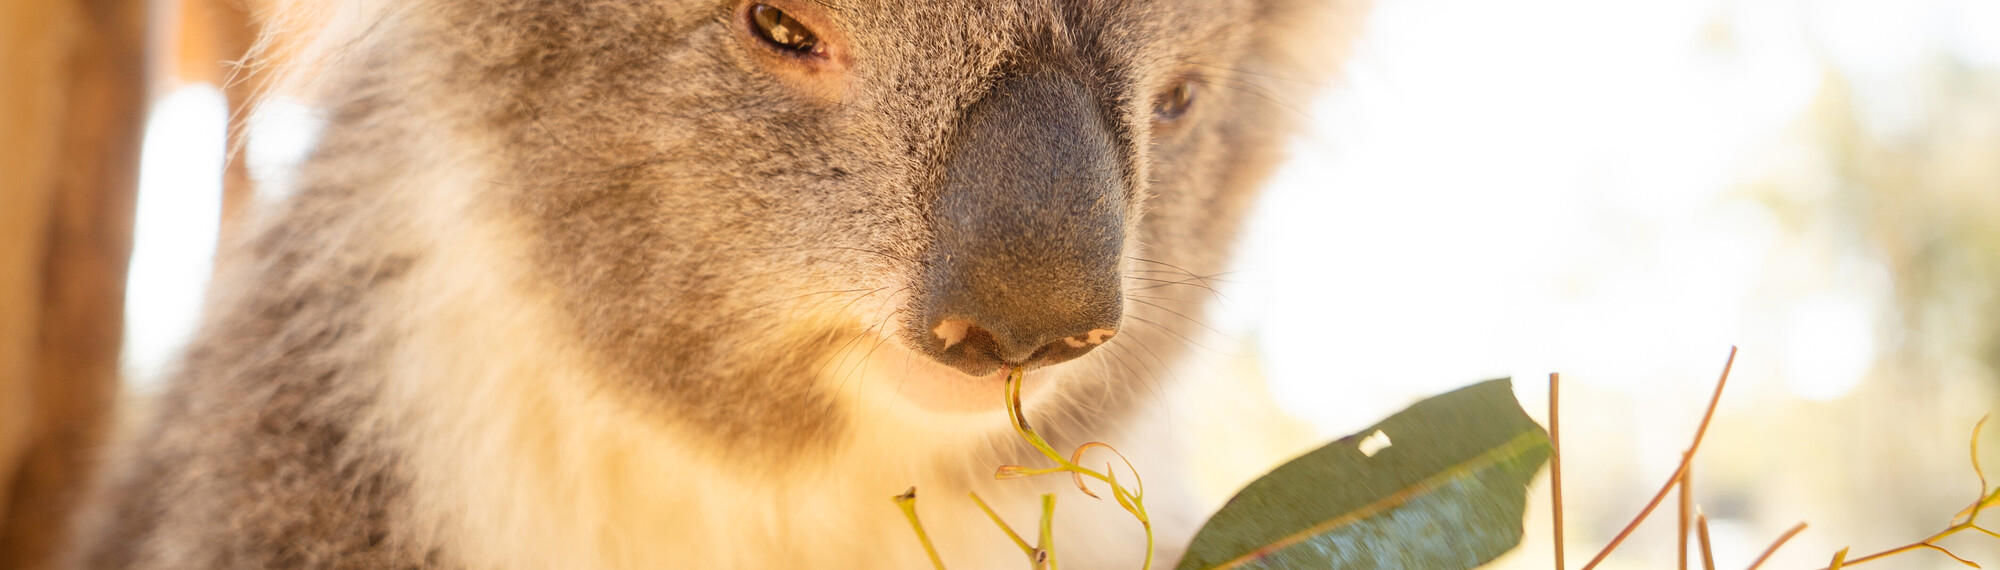 A close up of a koala's face with a big black nose and squinted brown eyes about to eat some eucalyptus leaves